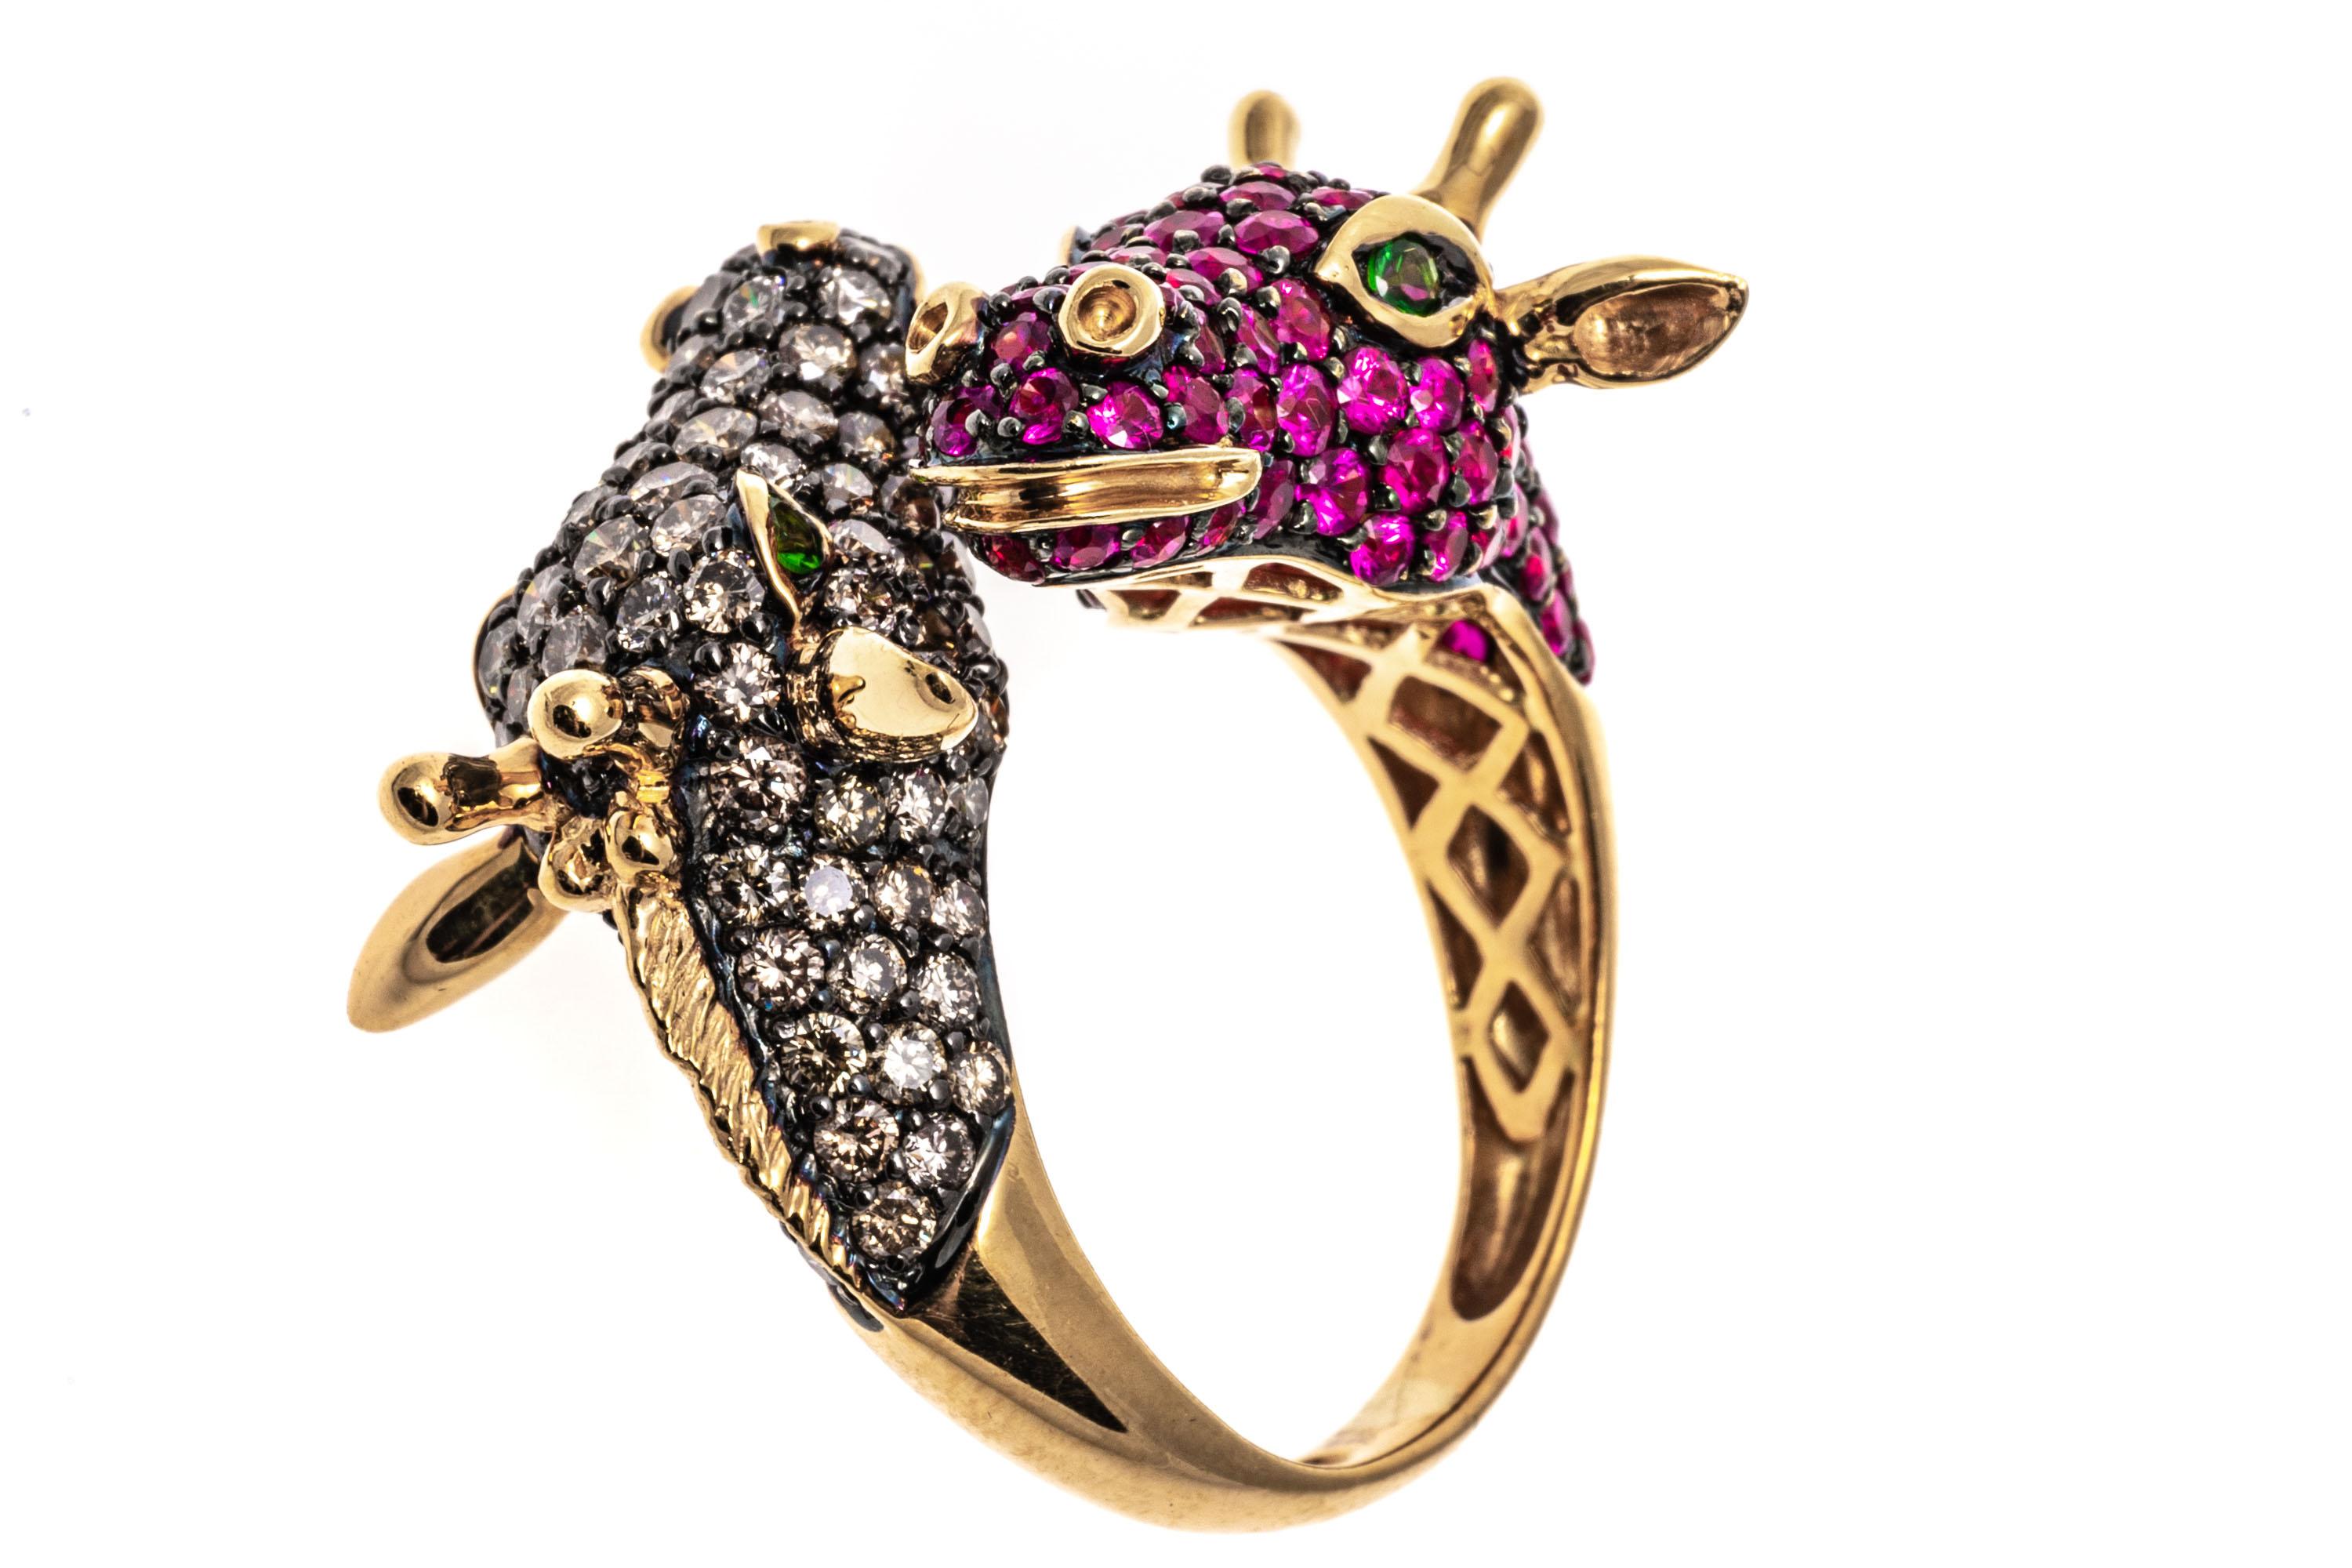 18k Gold Pave Set Cognac Diamond and Pink Sapphire Bypass Giraffes Ring For Sale 7